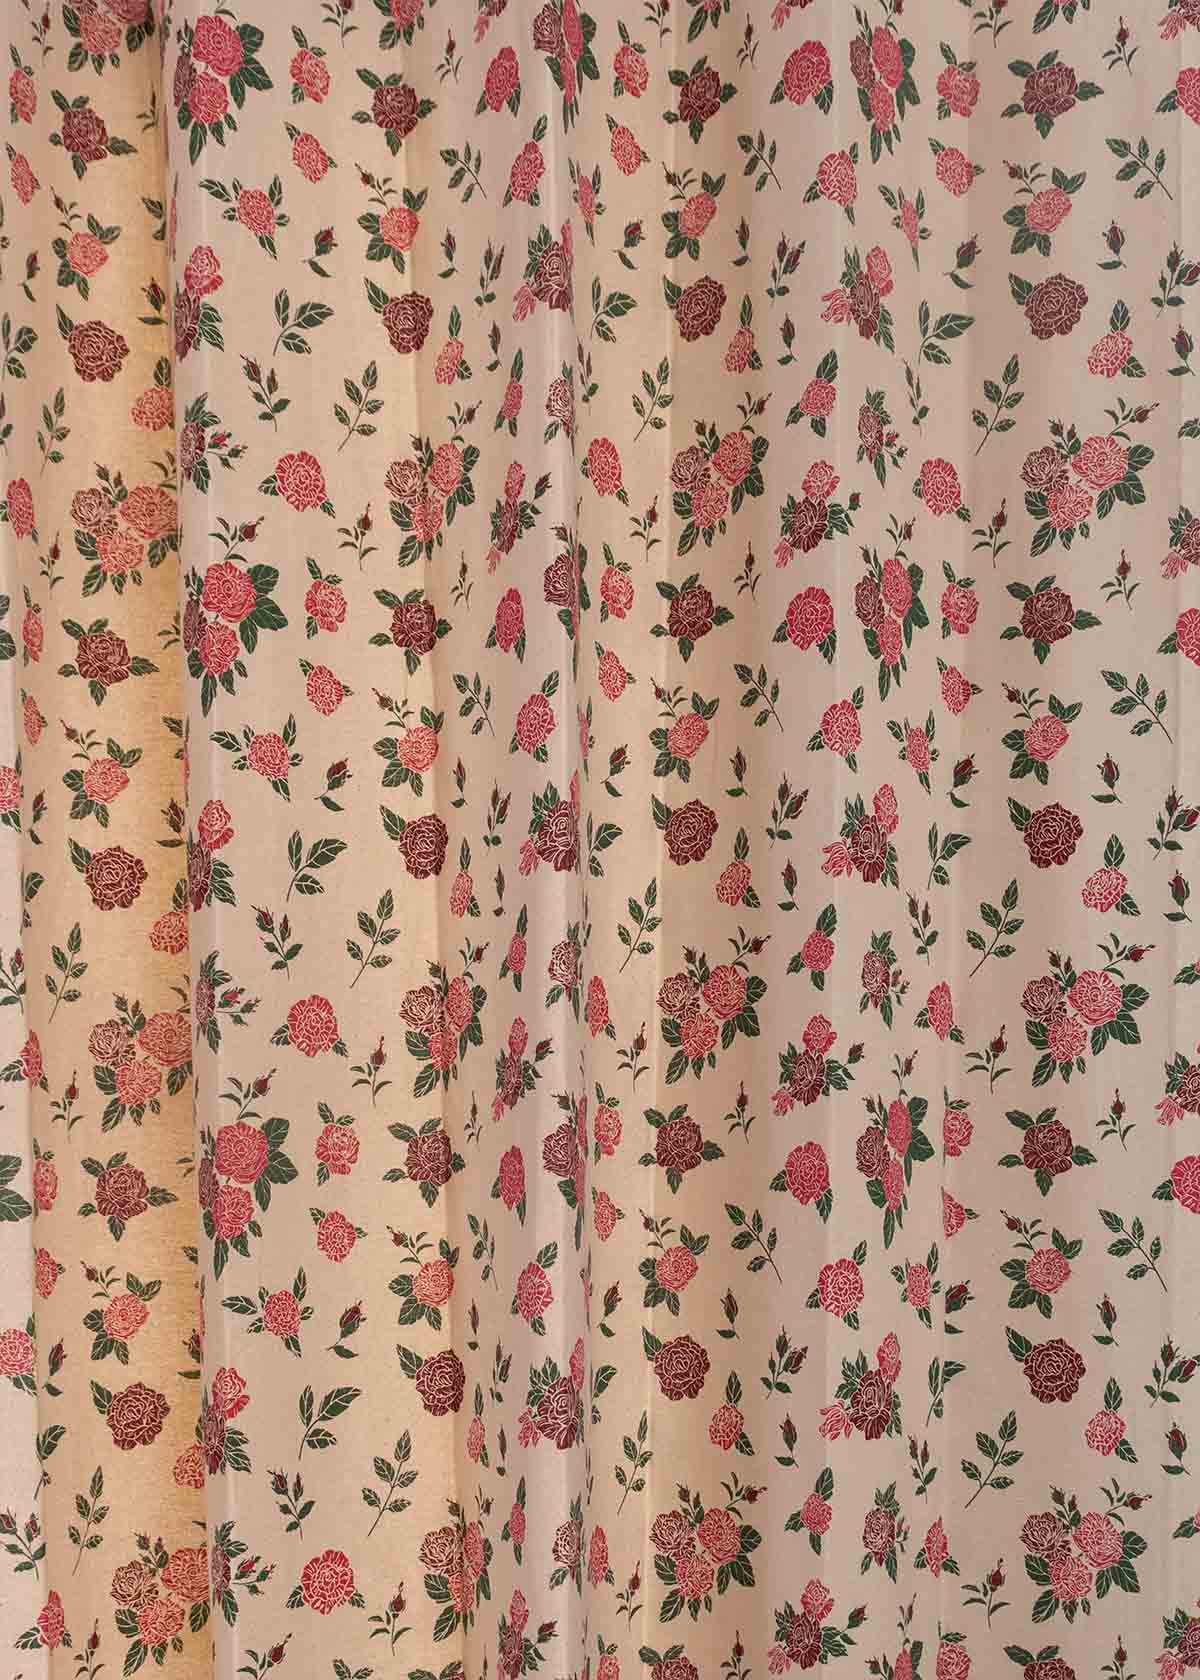 Wild Roses printed cotton Fabric - Red